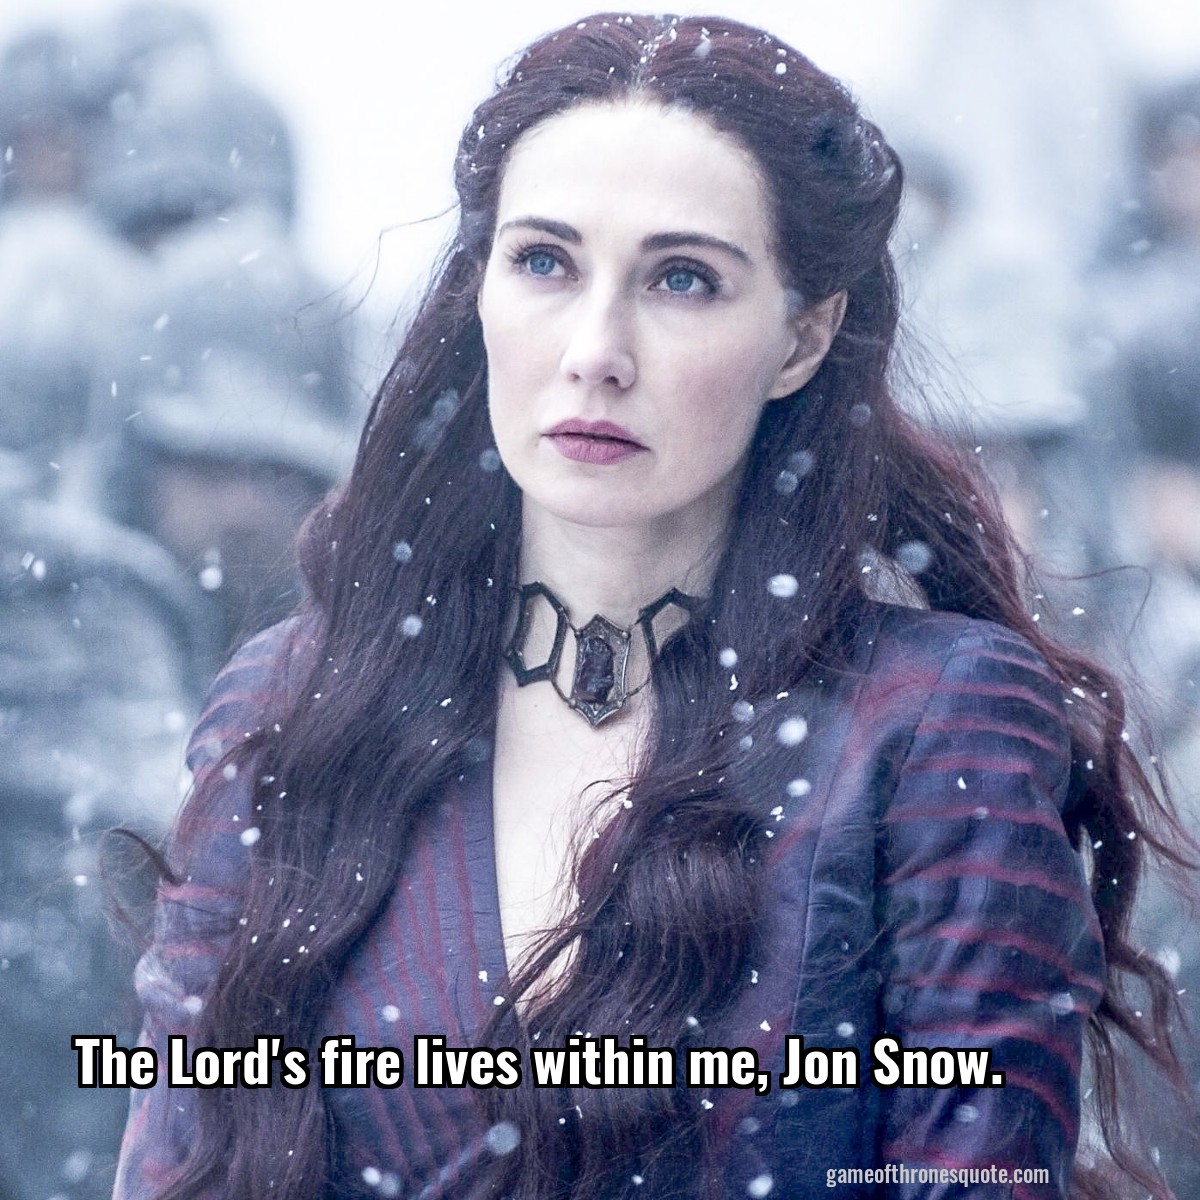 The Lord's fire lives within me, Jon Snow.